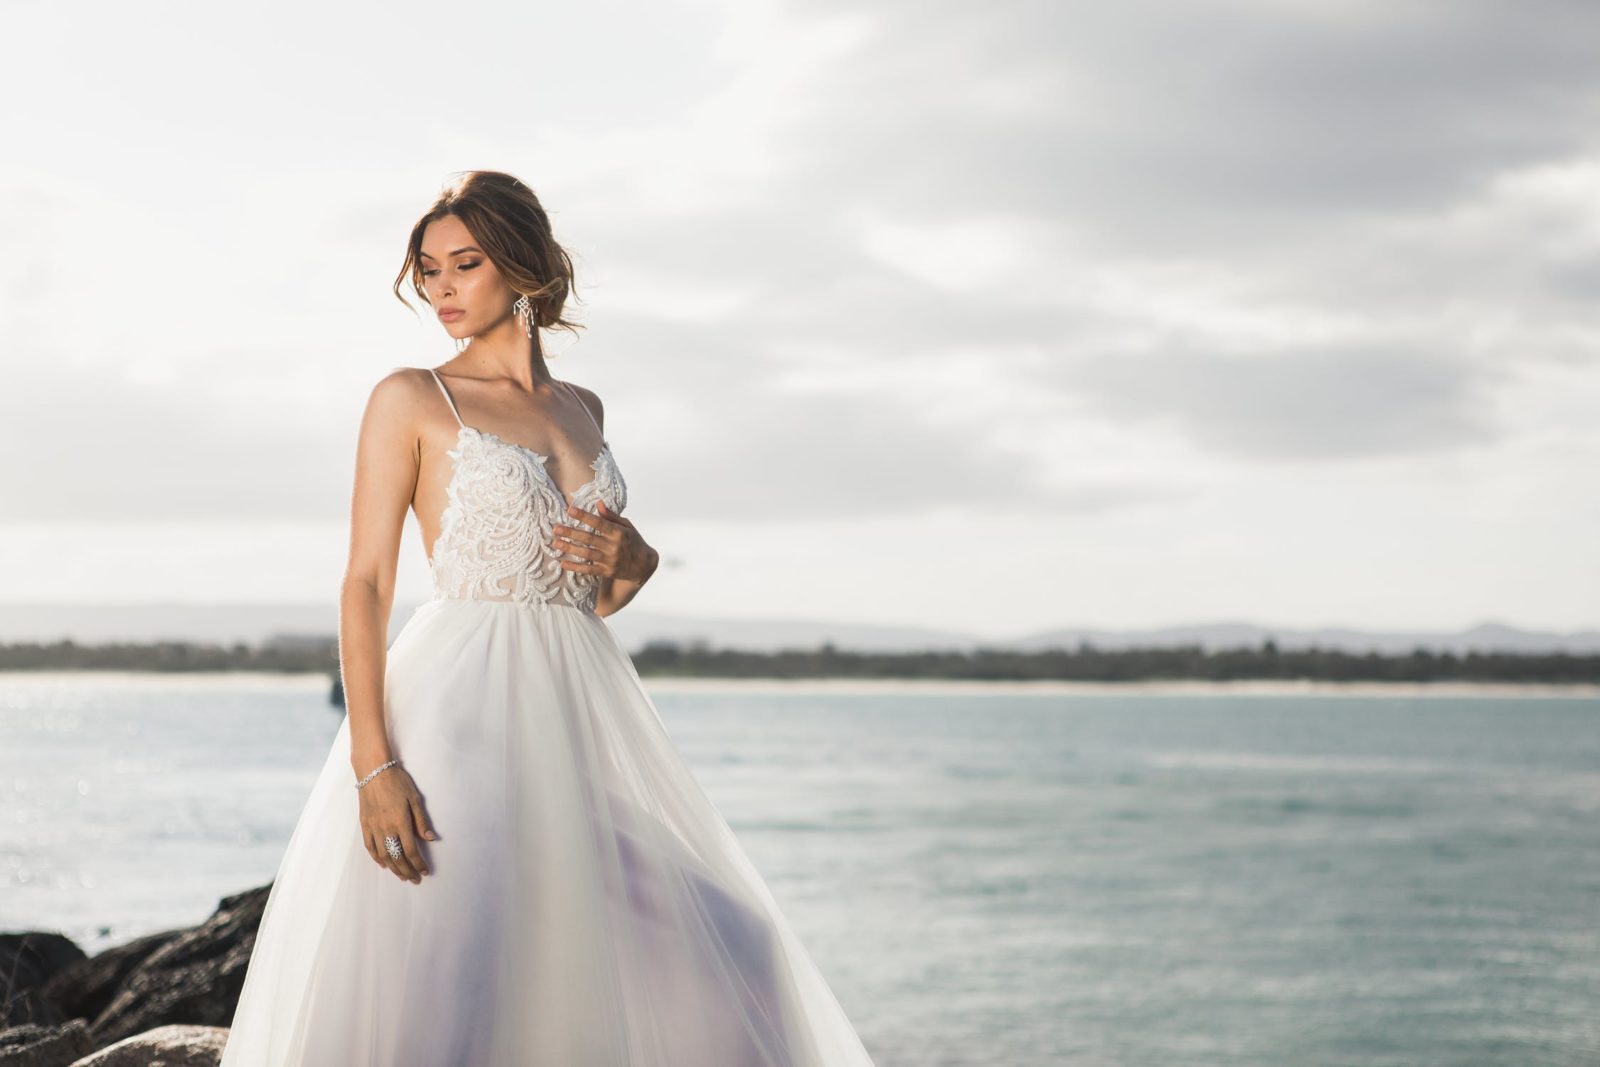 Advice for Buying Your Wedding Gown